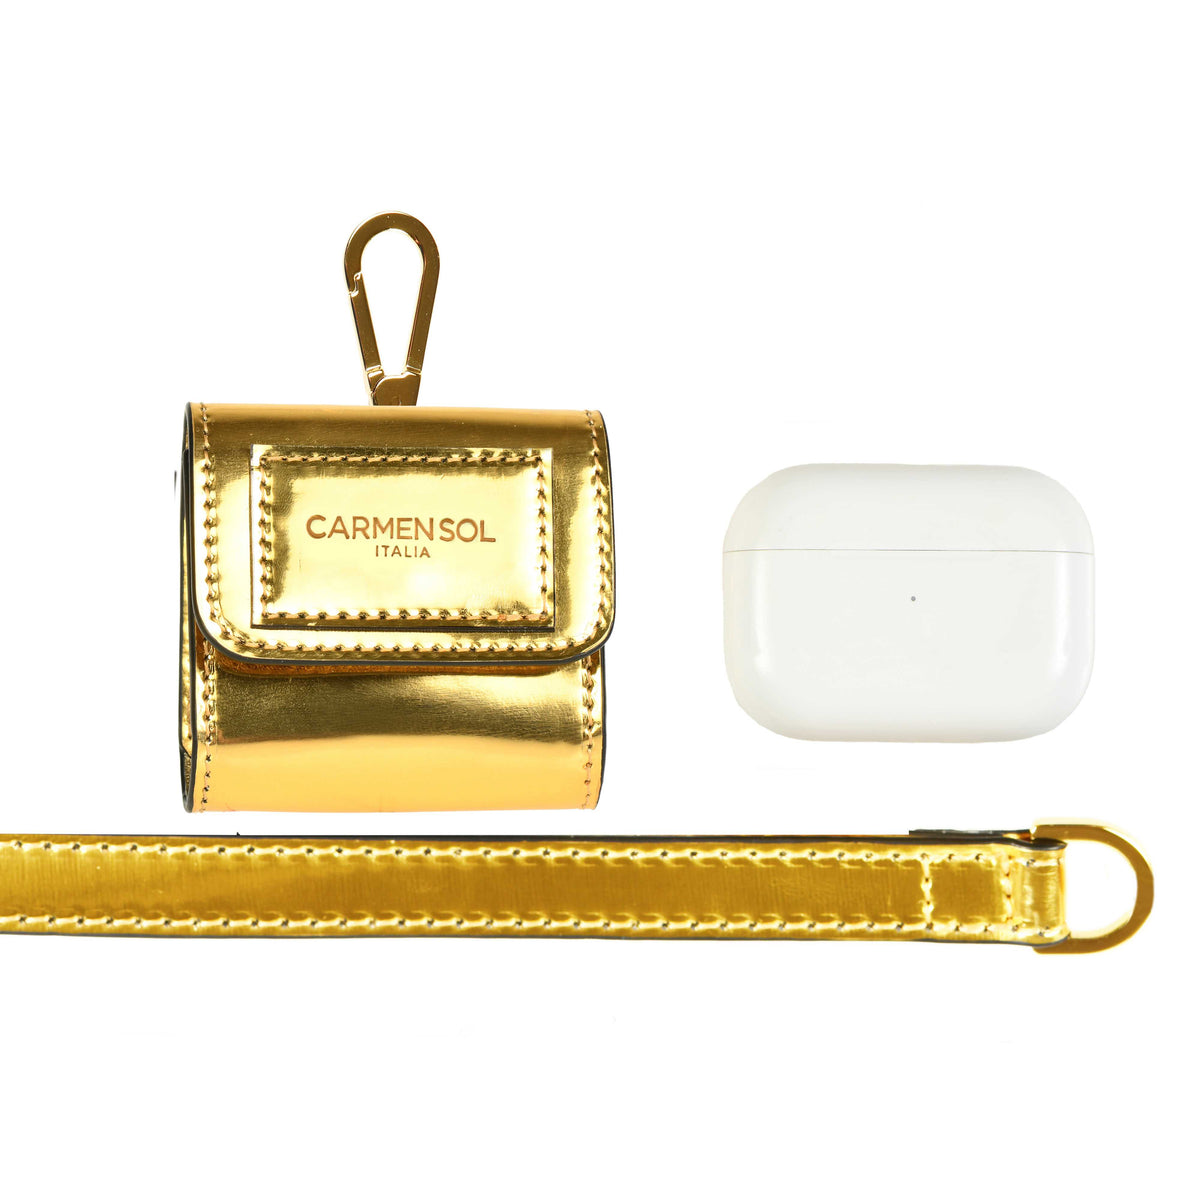 Tommy Carmen Sol airpod case in color gold